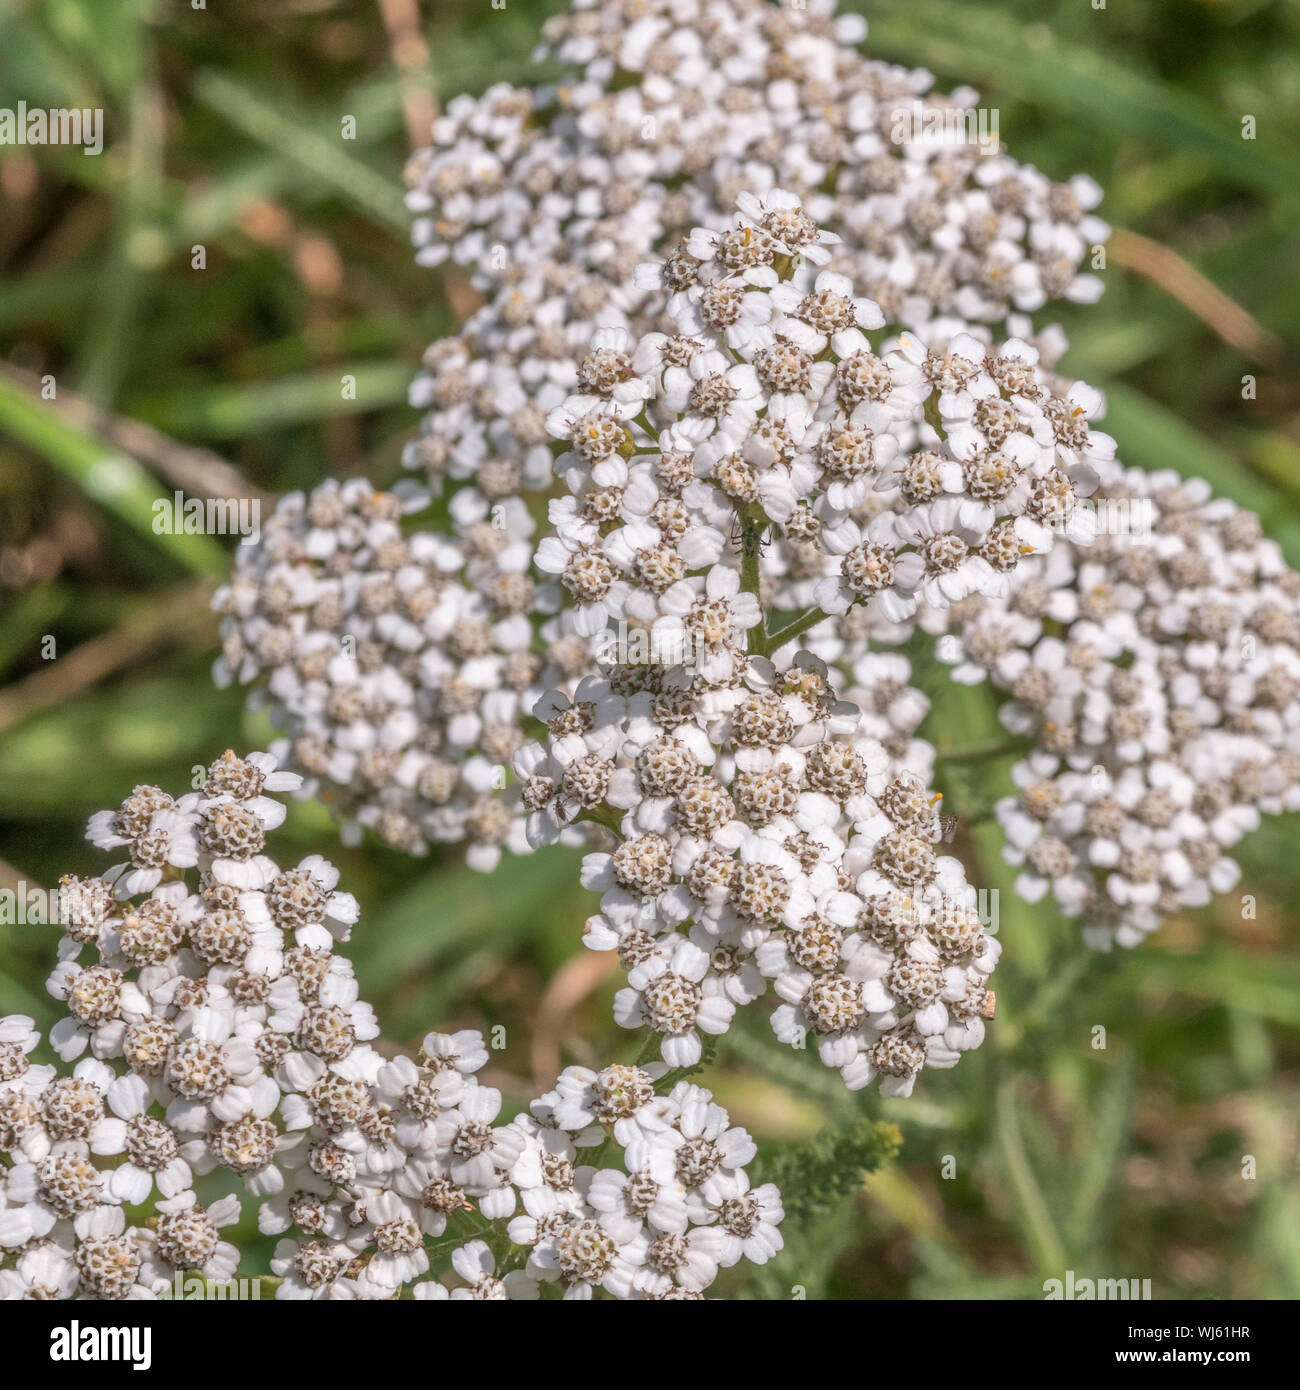 Yarrow / Achillea millefolium top with developed flower buds (June). Also called Milfoil, the plant was used as a medicinal plant in herbal remedies. Stock Photo